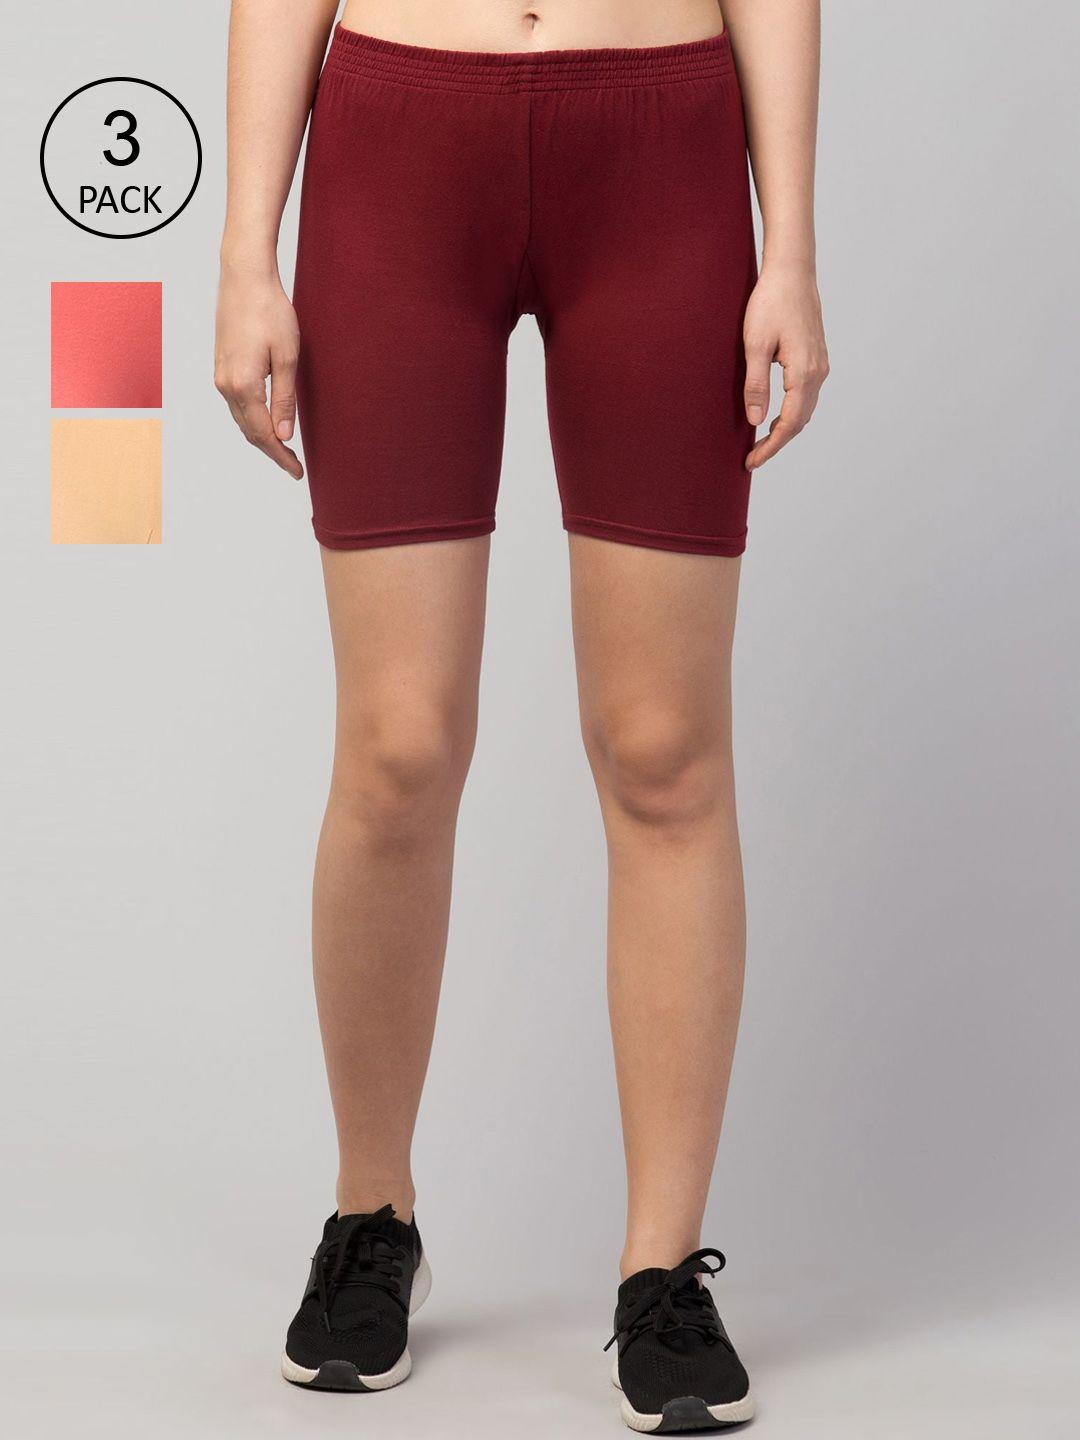 apraa & parma pack of 3 women maroon pure cotton slim fit cycling sports shorts